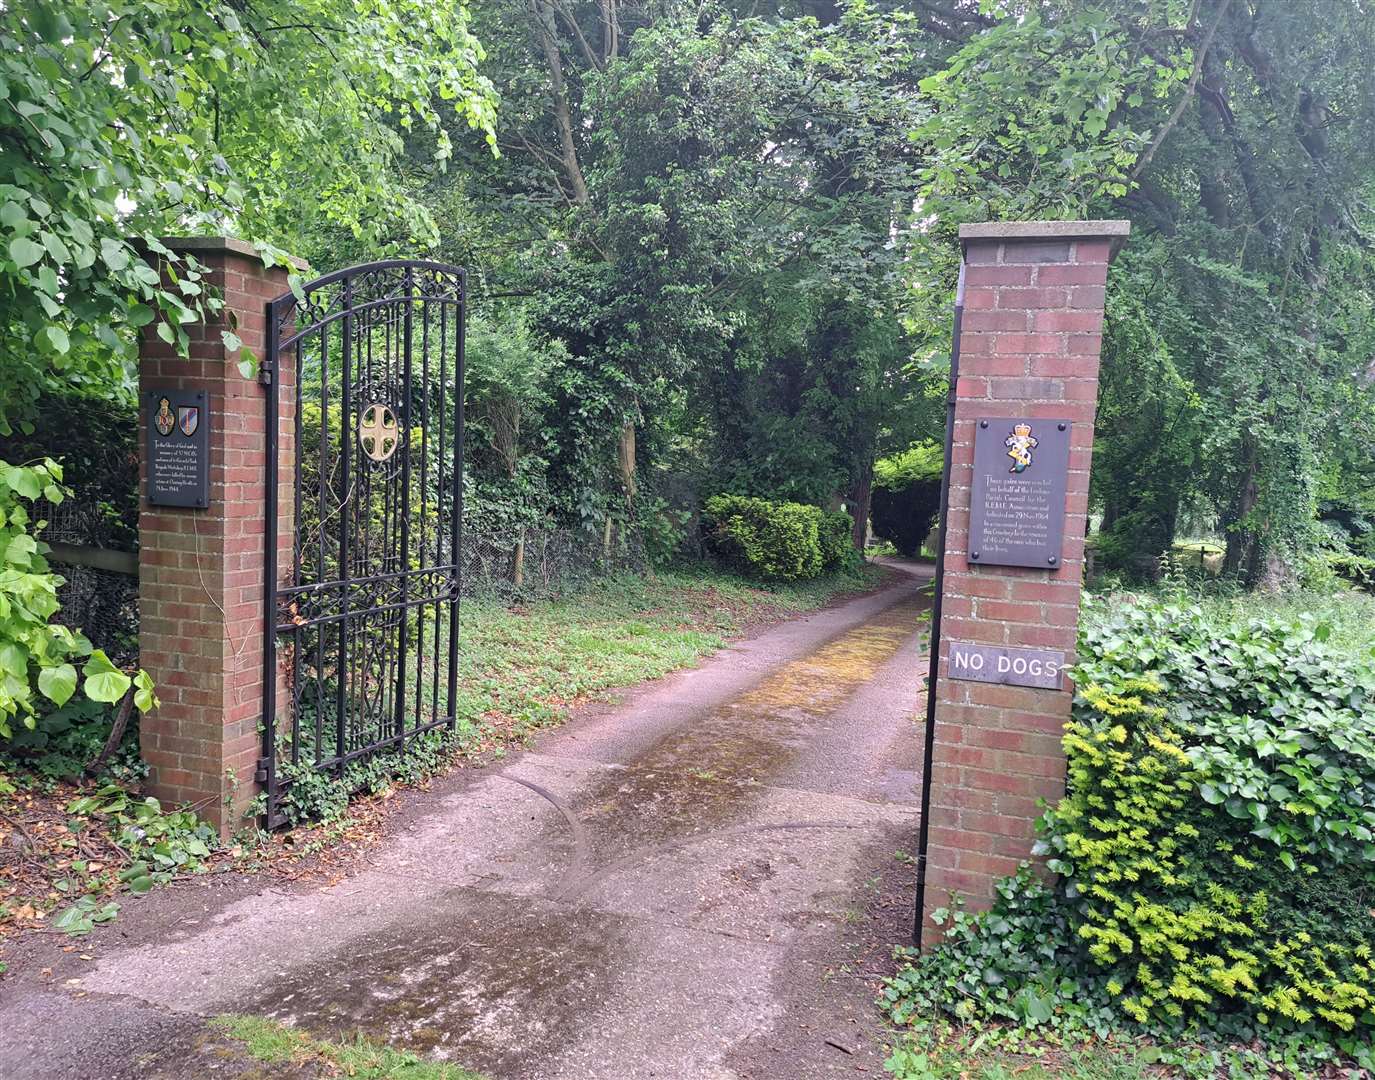 The Memorial Gates at the entrance to Lenham Cemetery were erected by REME in 1964